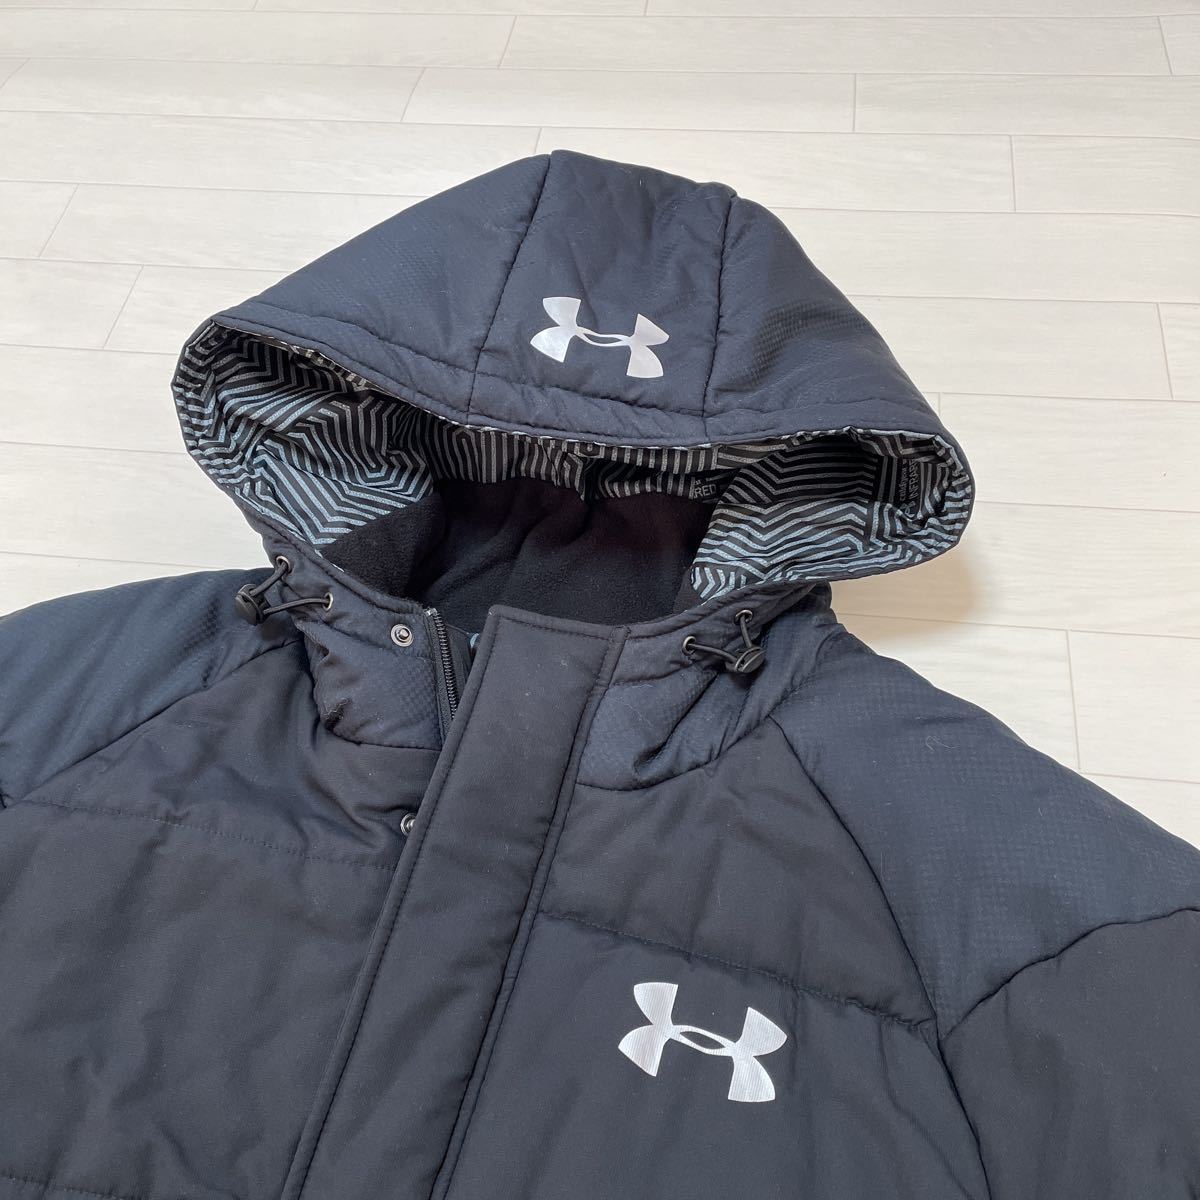 UNDER ARMOUR Under Armor in fla red long coat MTR7770 BLK black bench coat size XL beautiful goods 